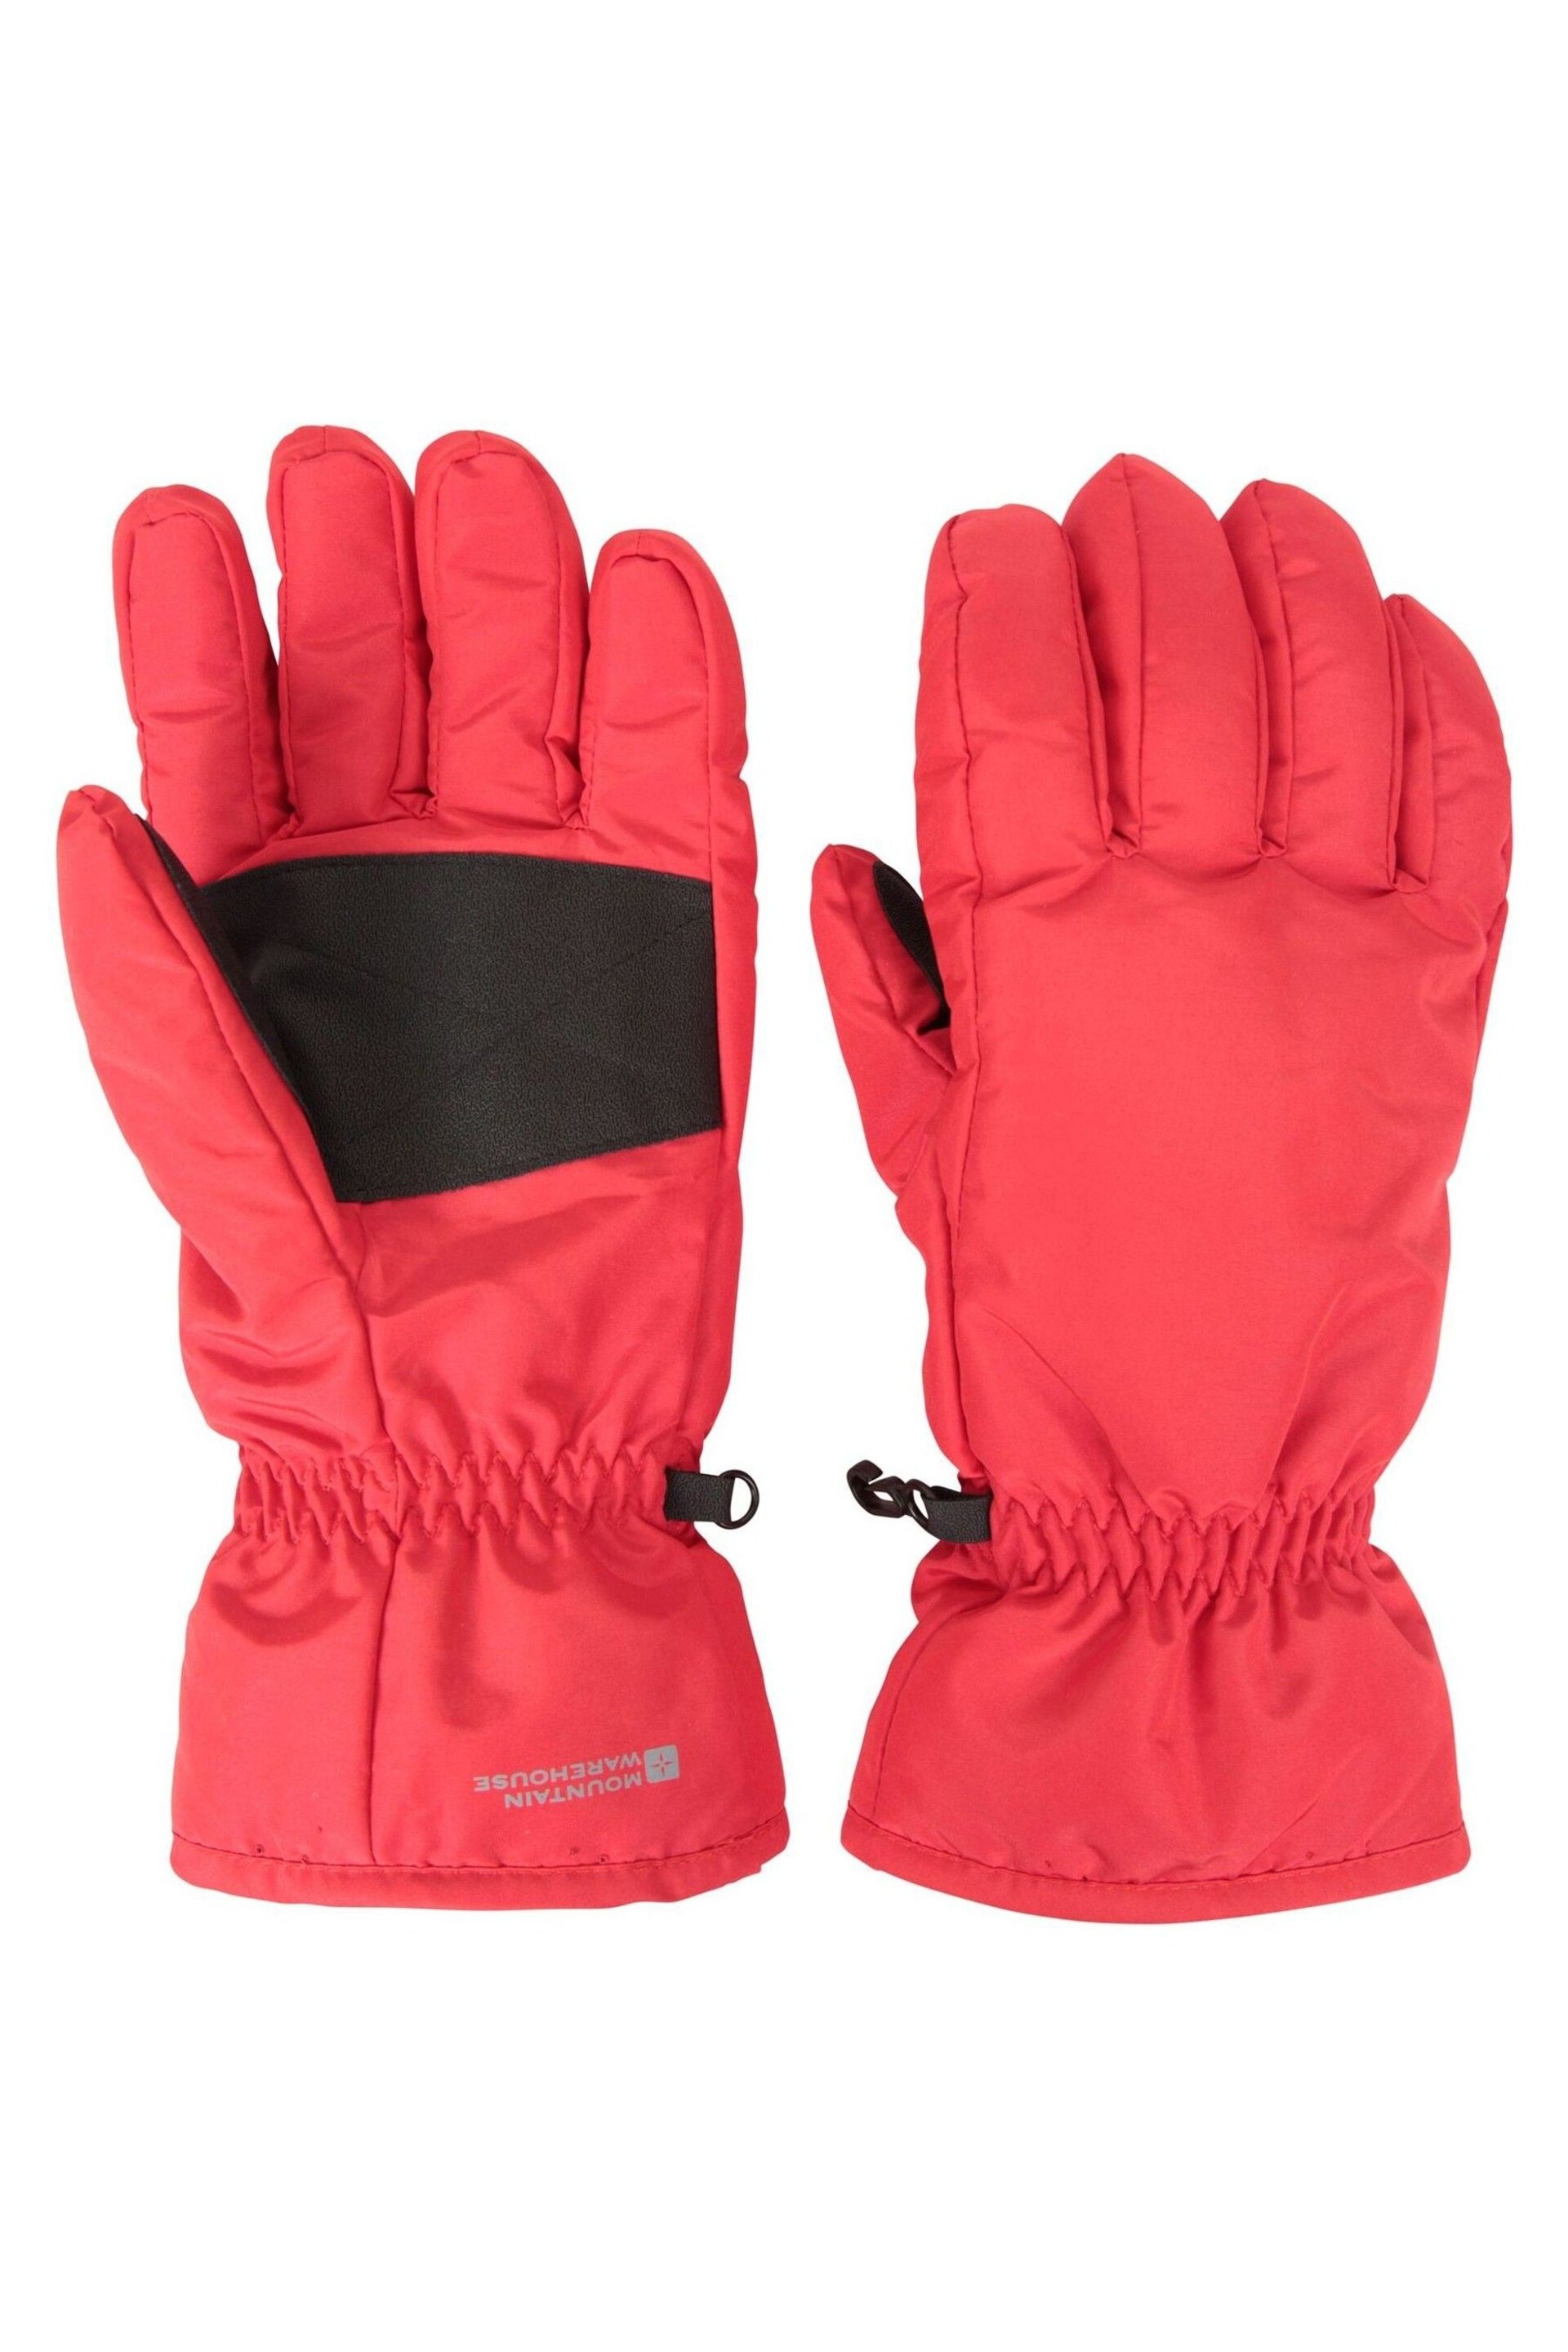 Mountain Warehouse Red Mens Fleece Lined Ski Gloves - Image 2 of 7